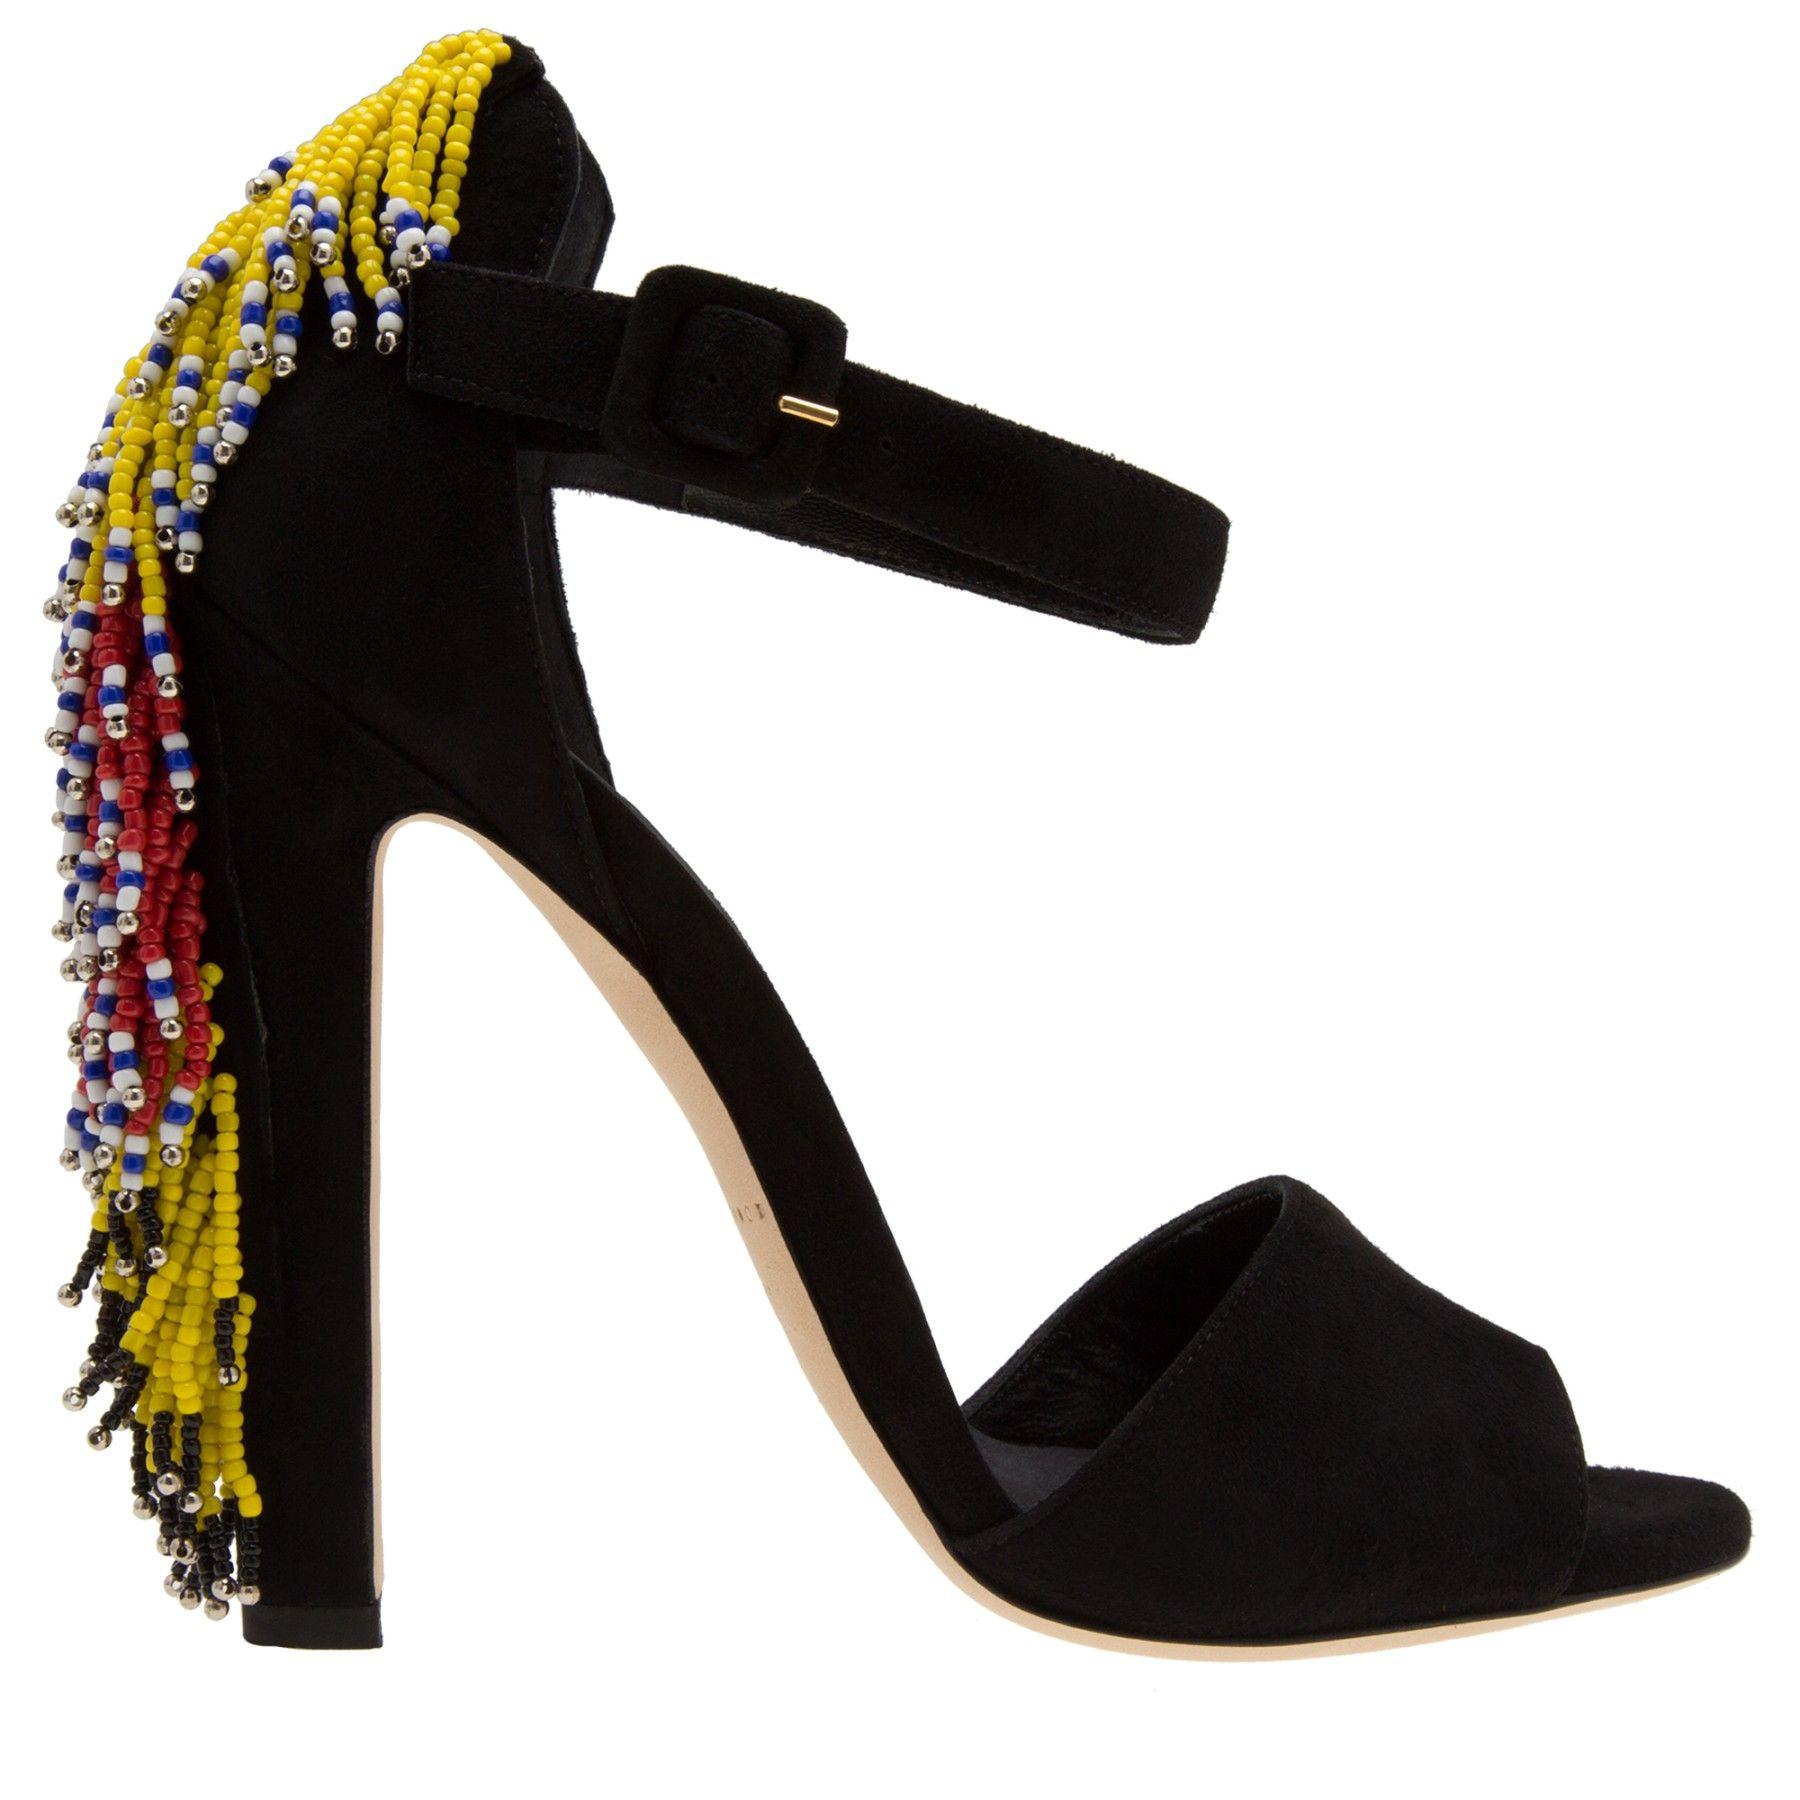 Brian Atwood Logo - Brian Atwood Irene beaded suede sandals for Women - Black | Level Shoes